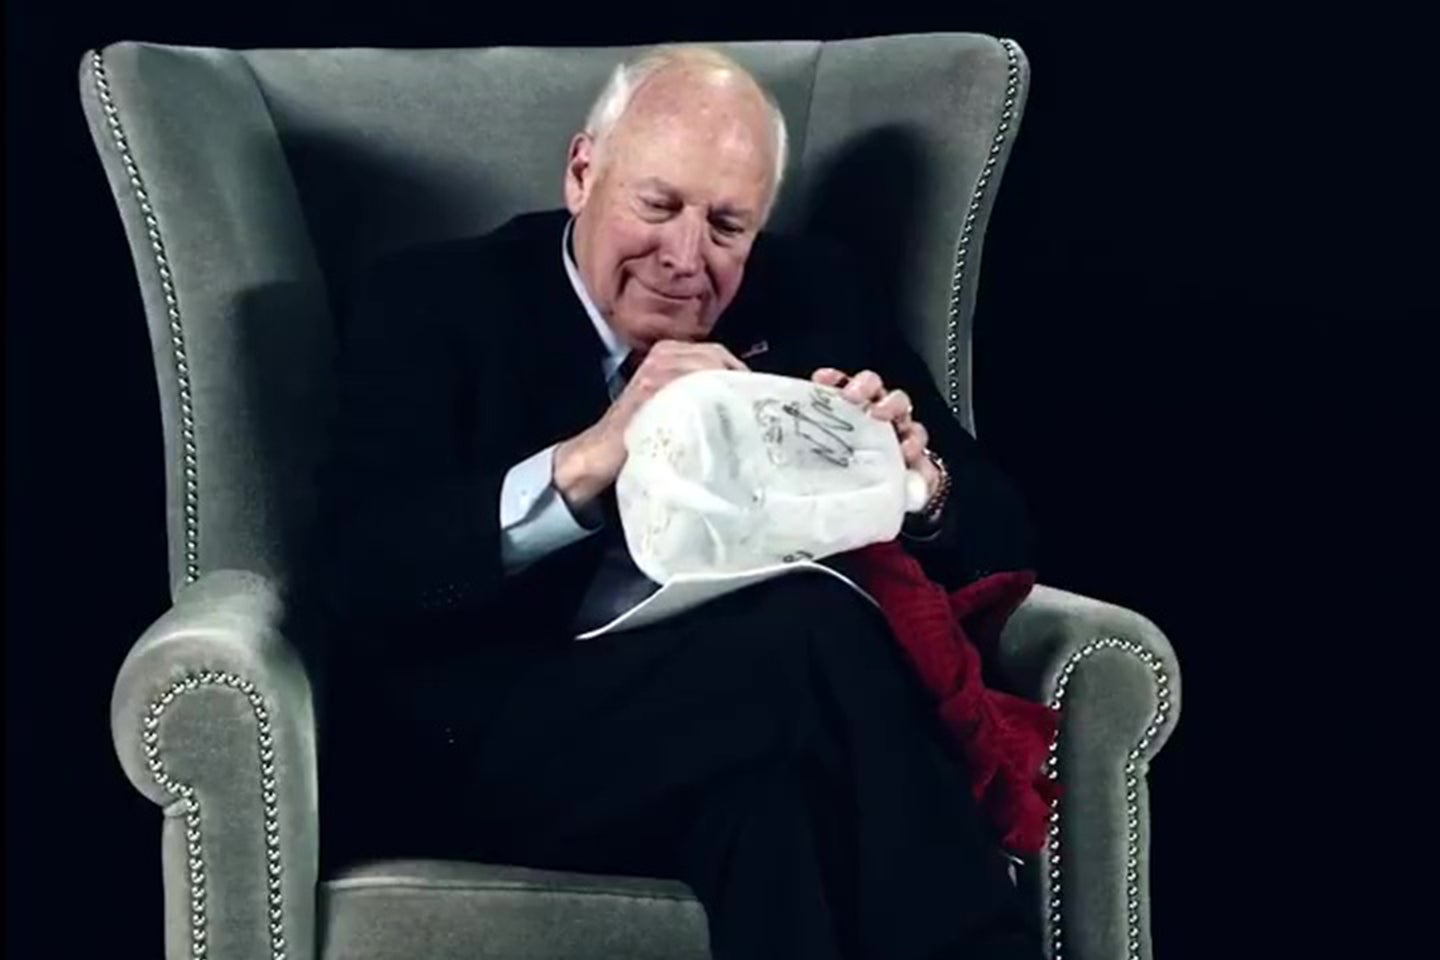 Sacha Baron Cohen Asks Dick Cheney To Autograph A Waterboard Kit In A New Teaser For His